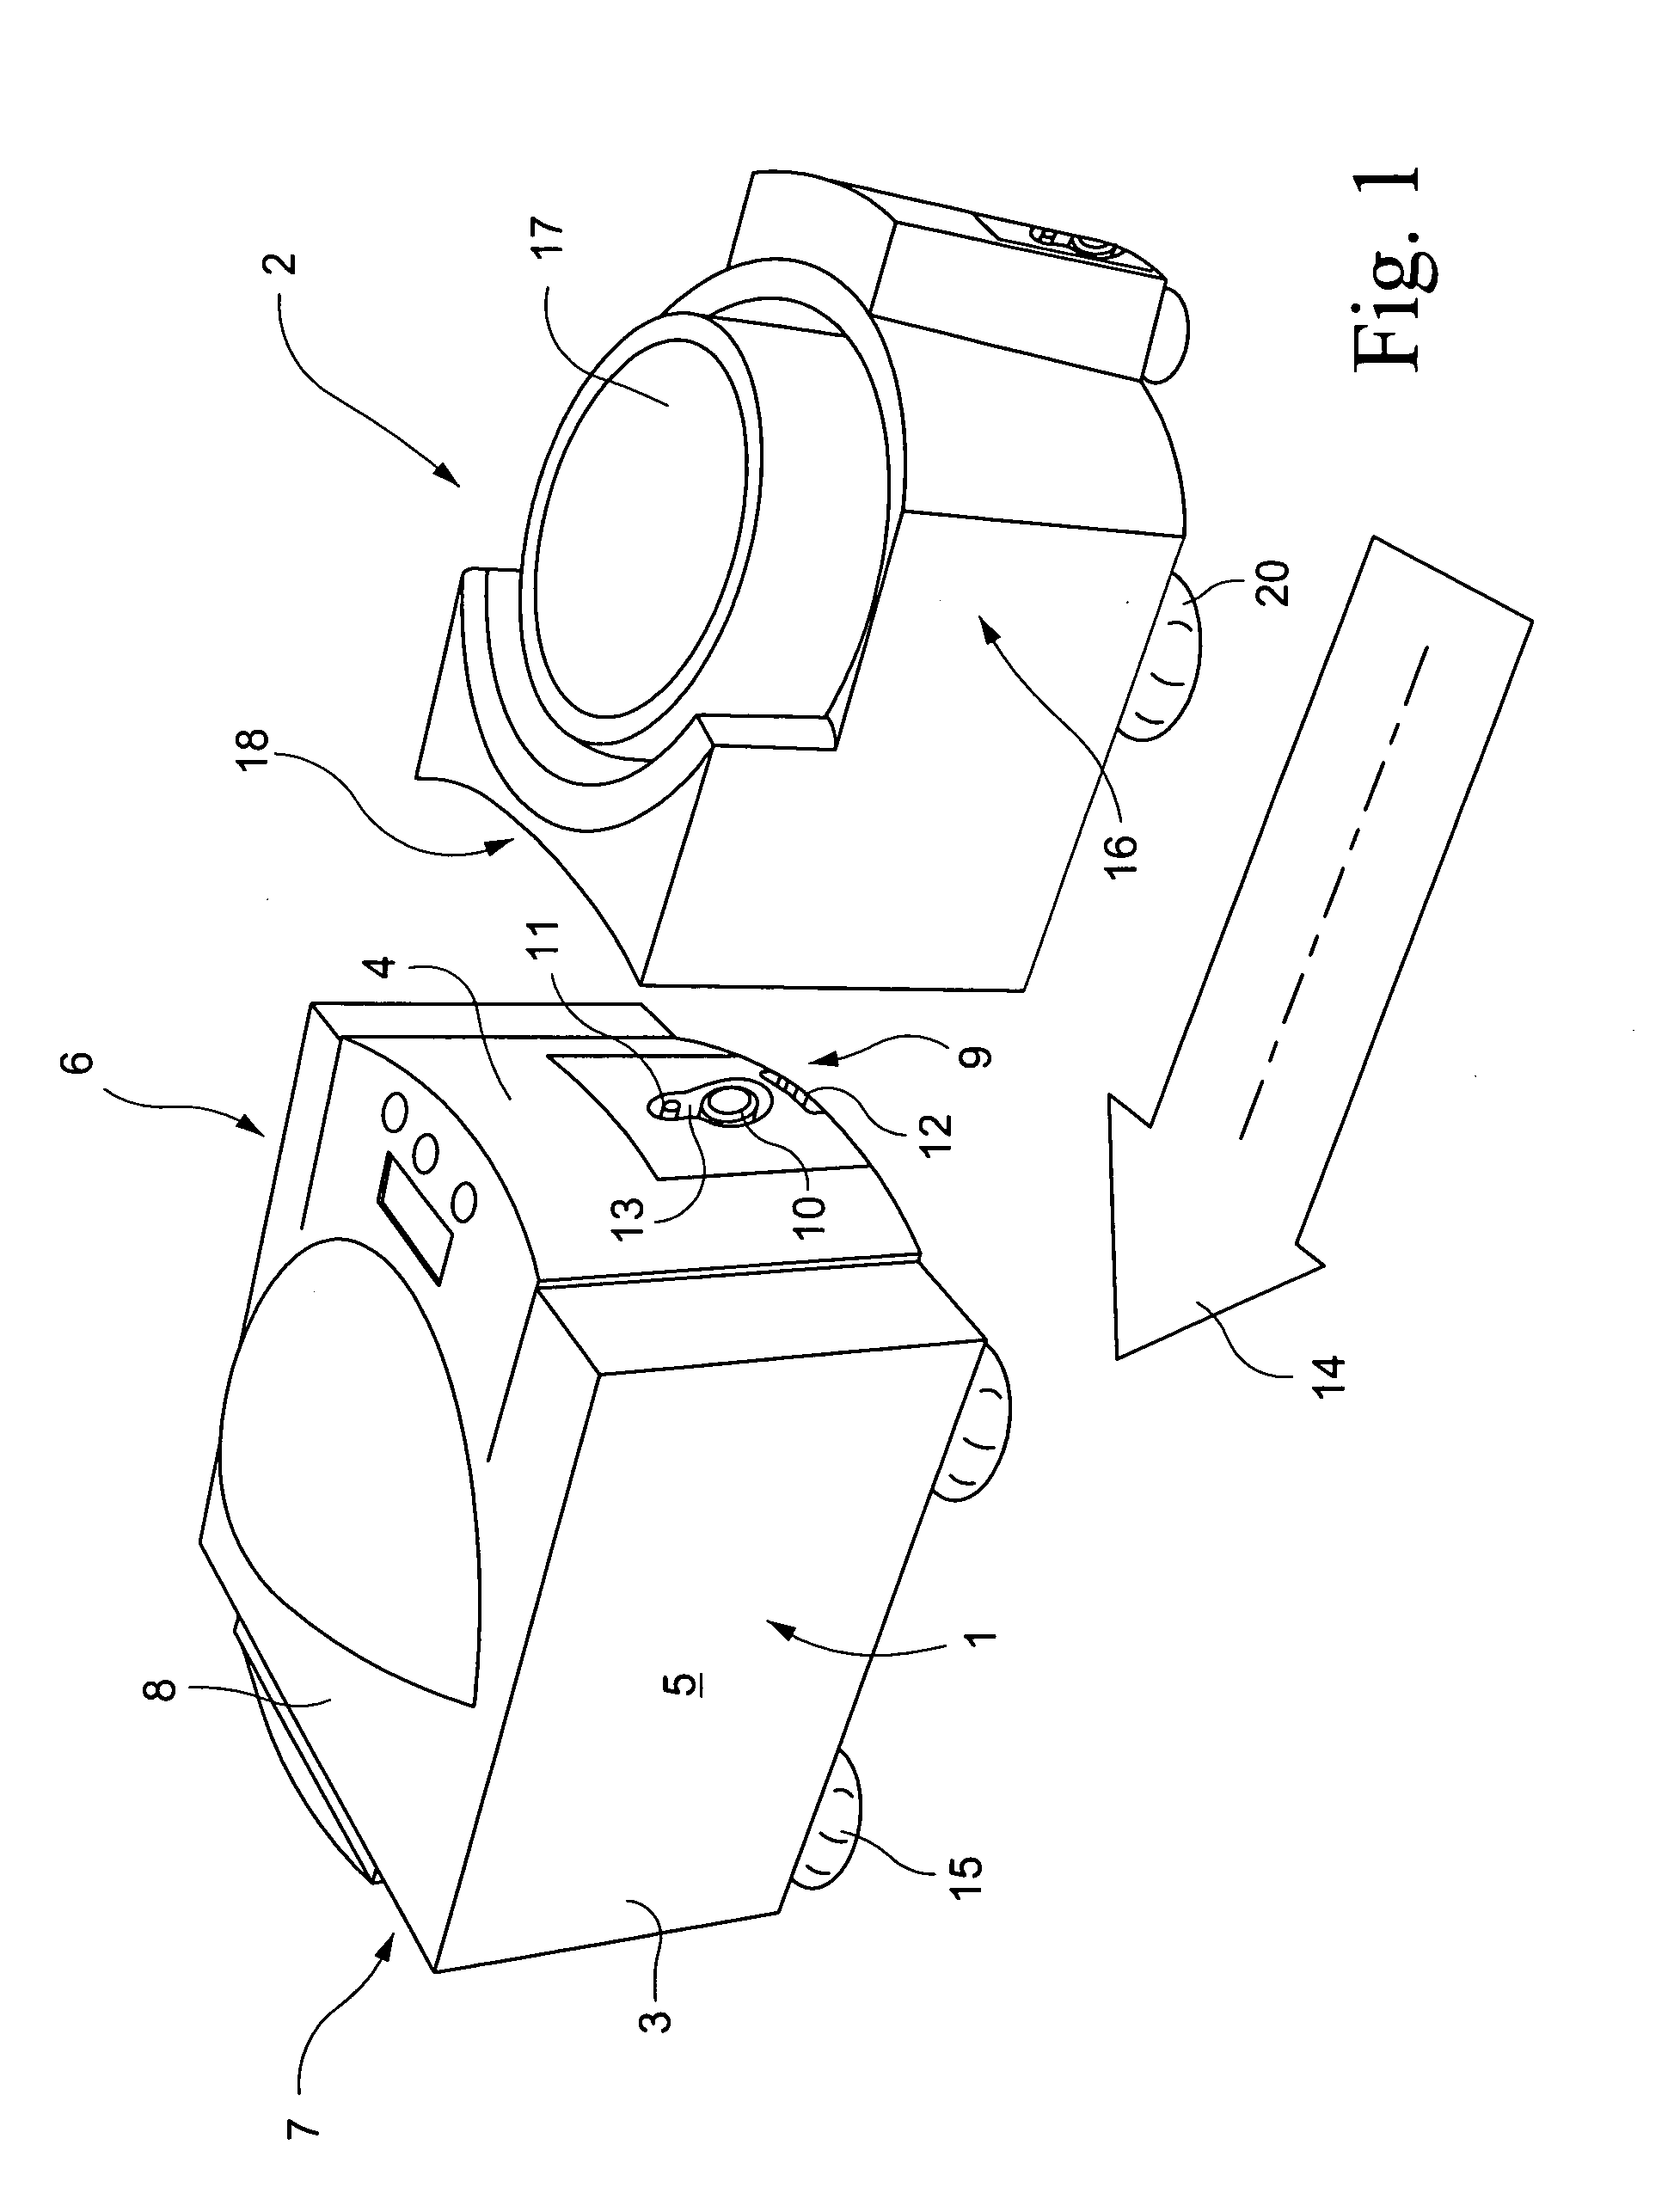 Device for supplying respiratory gas